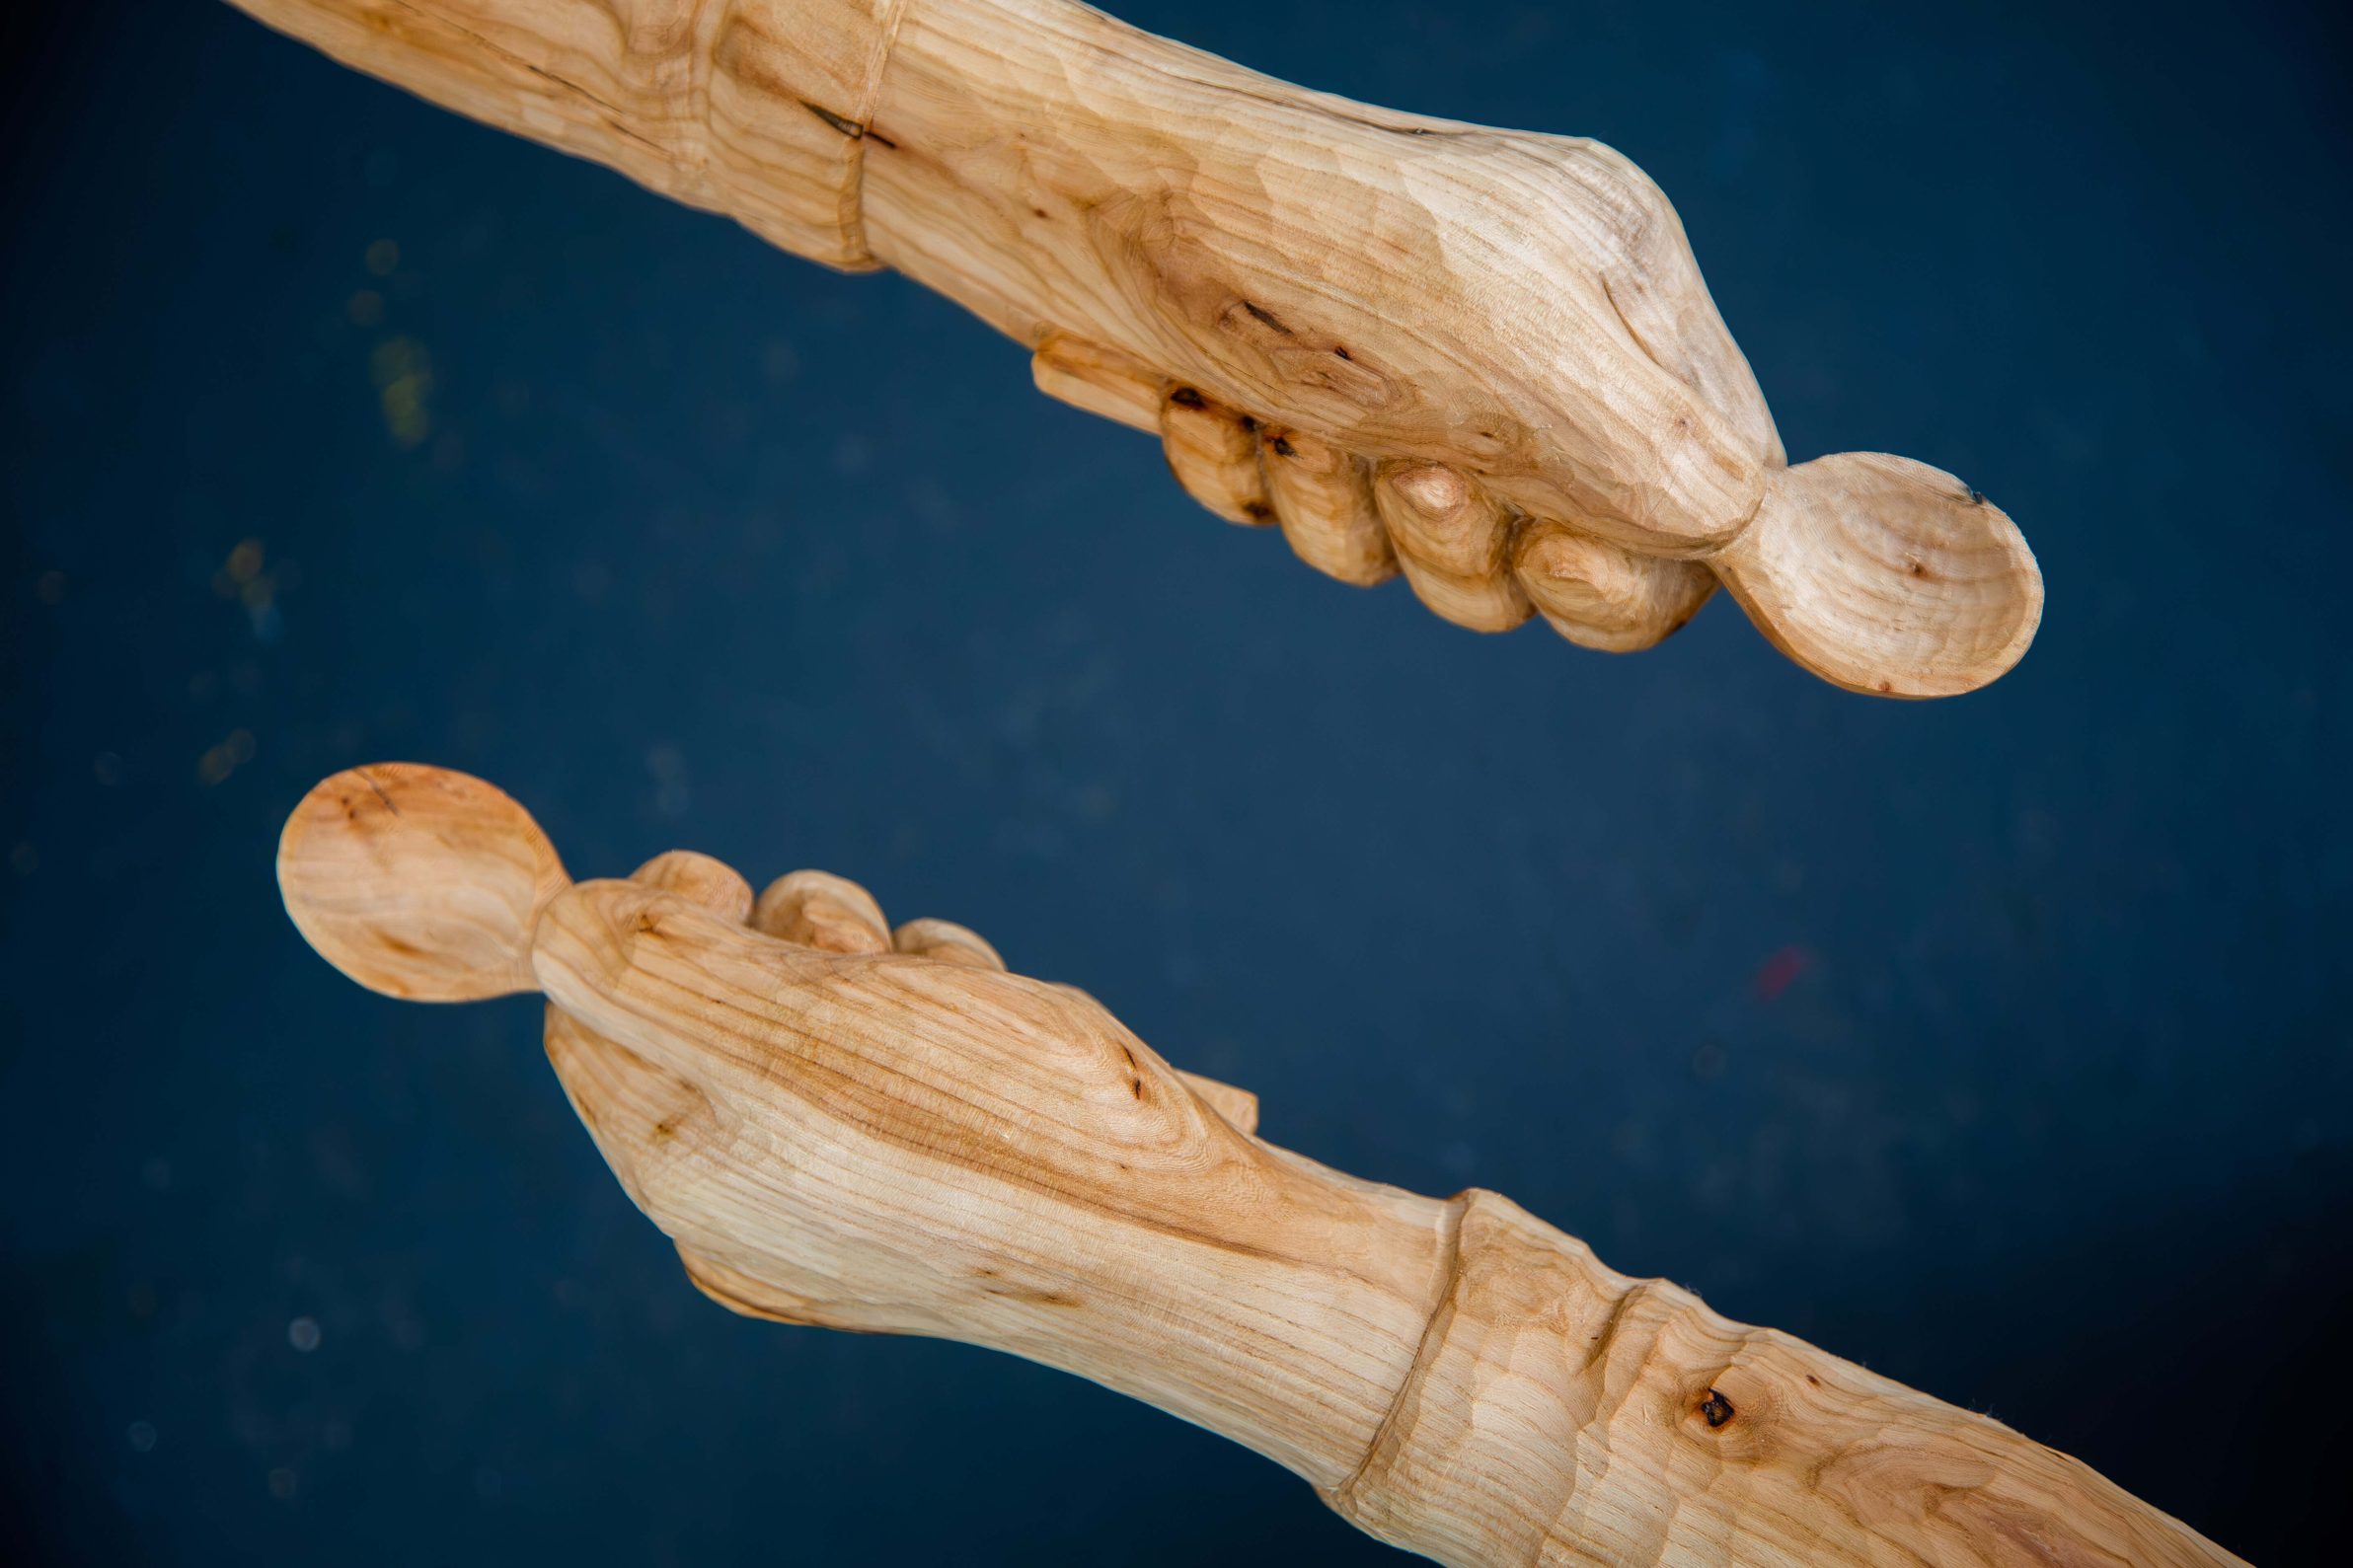 Two wooden hands with spoons